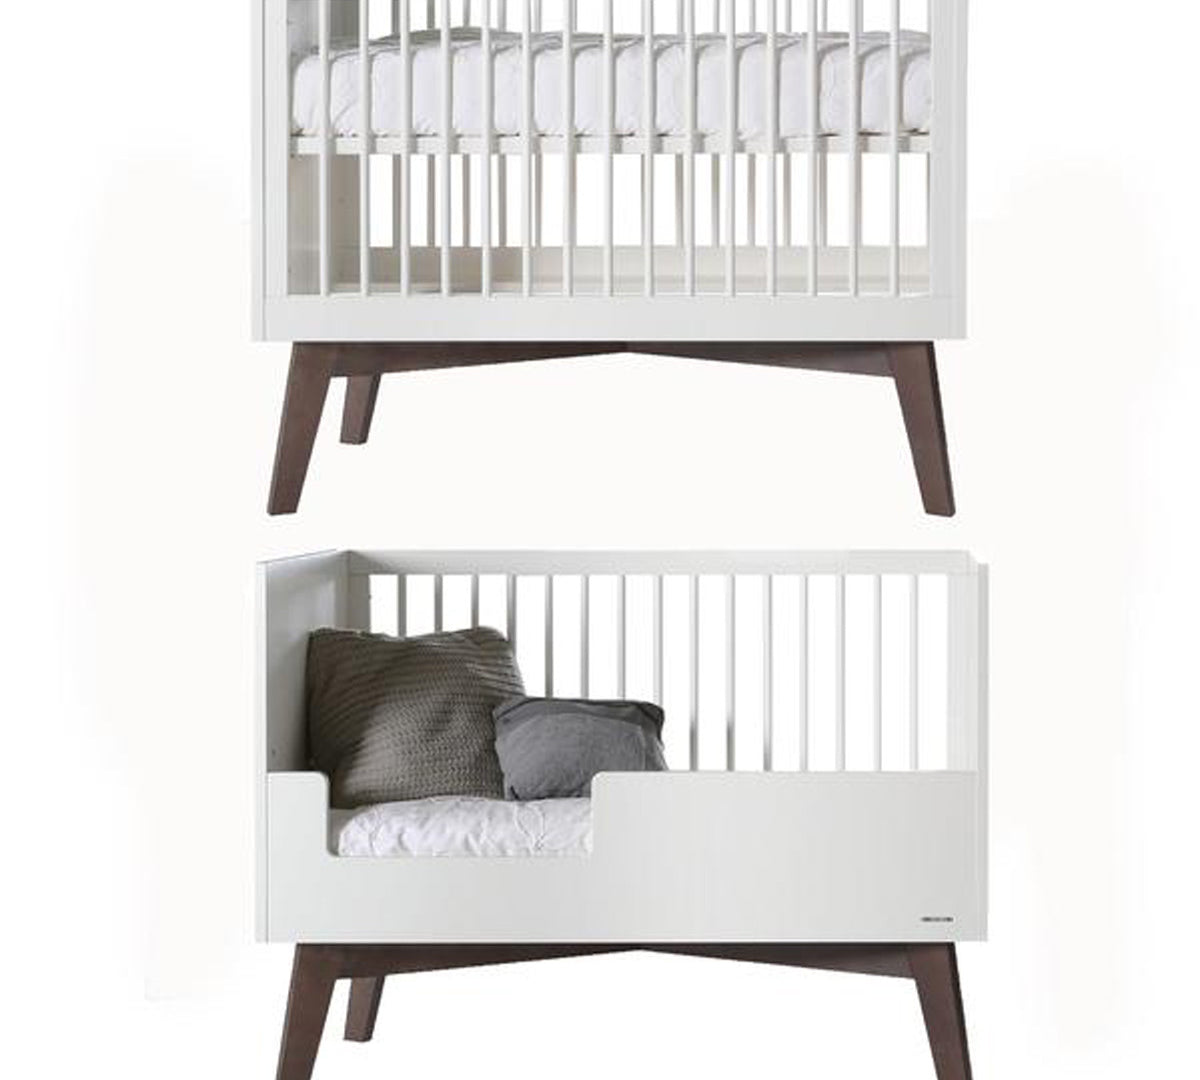 Deer Industries Baby bed Nursery furniture Sixties matte white in combination with a dark wooden base. Cot and cot bed with standard European mattress size 60x120 or 70x140. Made in Europe complies with all European safety regulations. Stylish baby crib contemporary but a bit retro. Gender neutral for baby boy and baby girl and for toddler as the beds are convertible in both sizes.